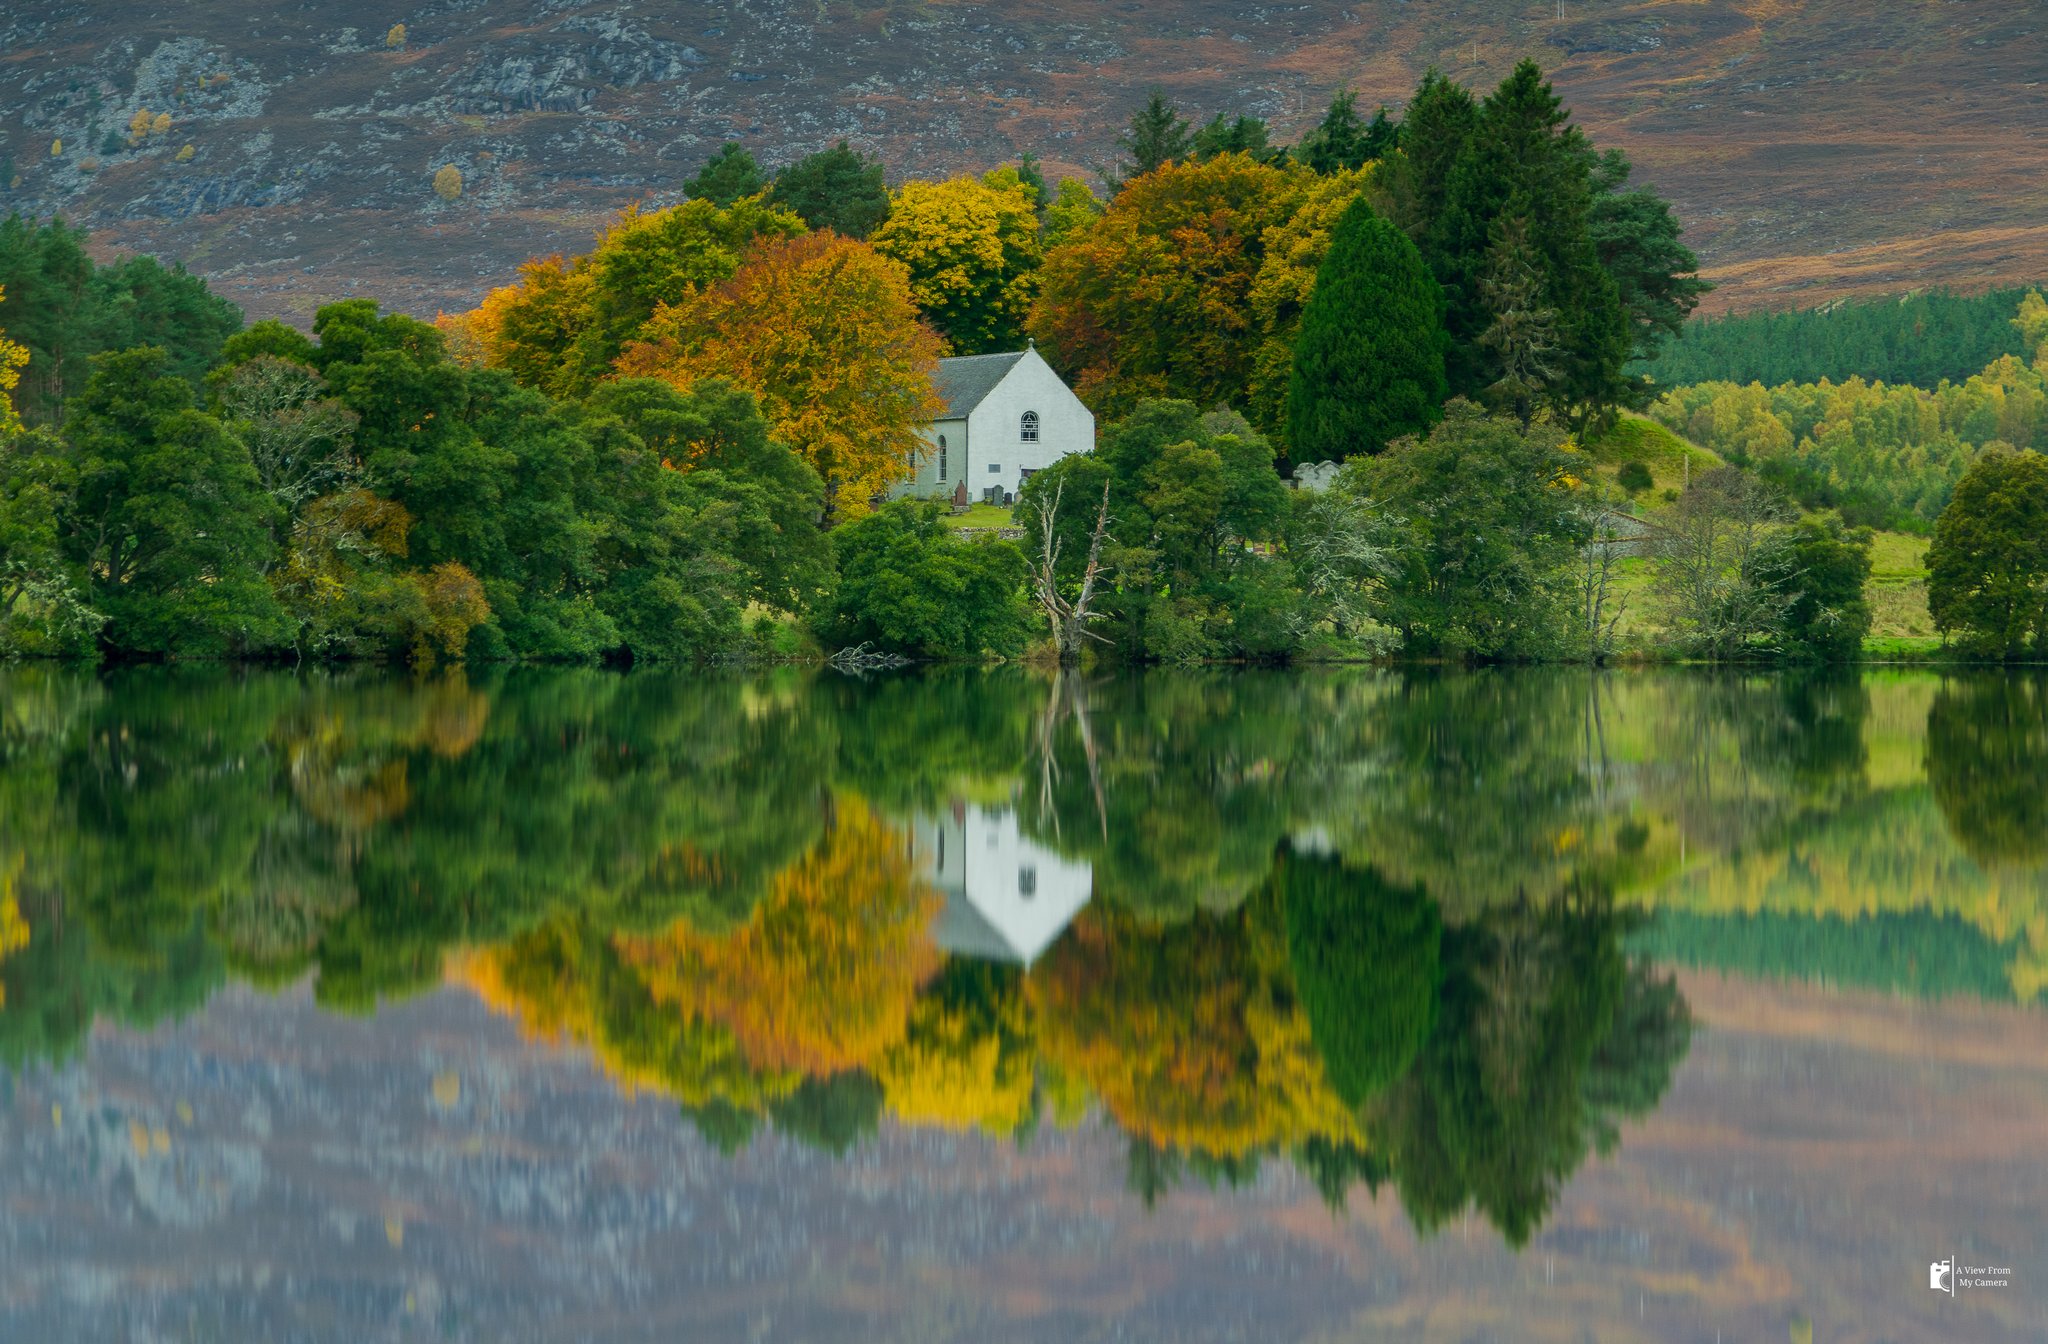 2nd Place Autumn reflection at Loch Alvie by A View From My Camera @ViewFromCamera